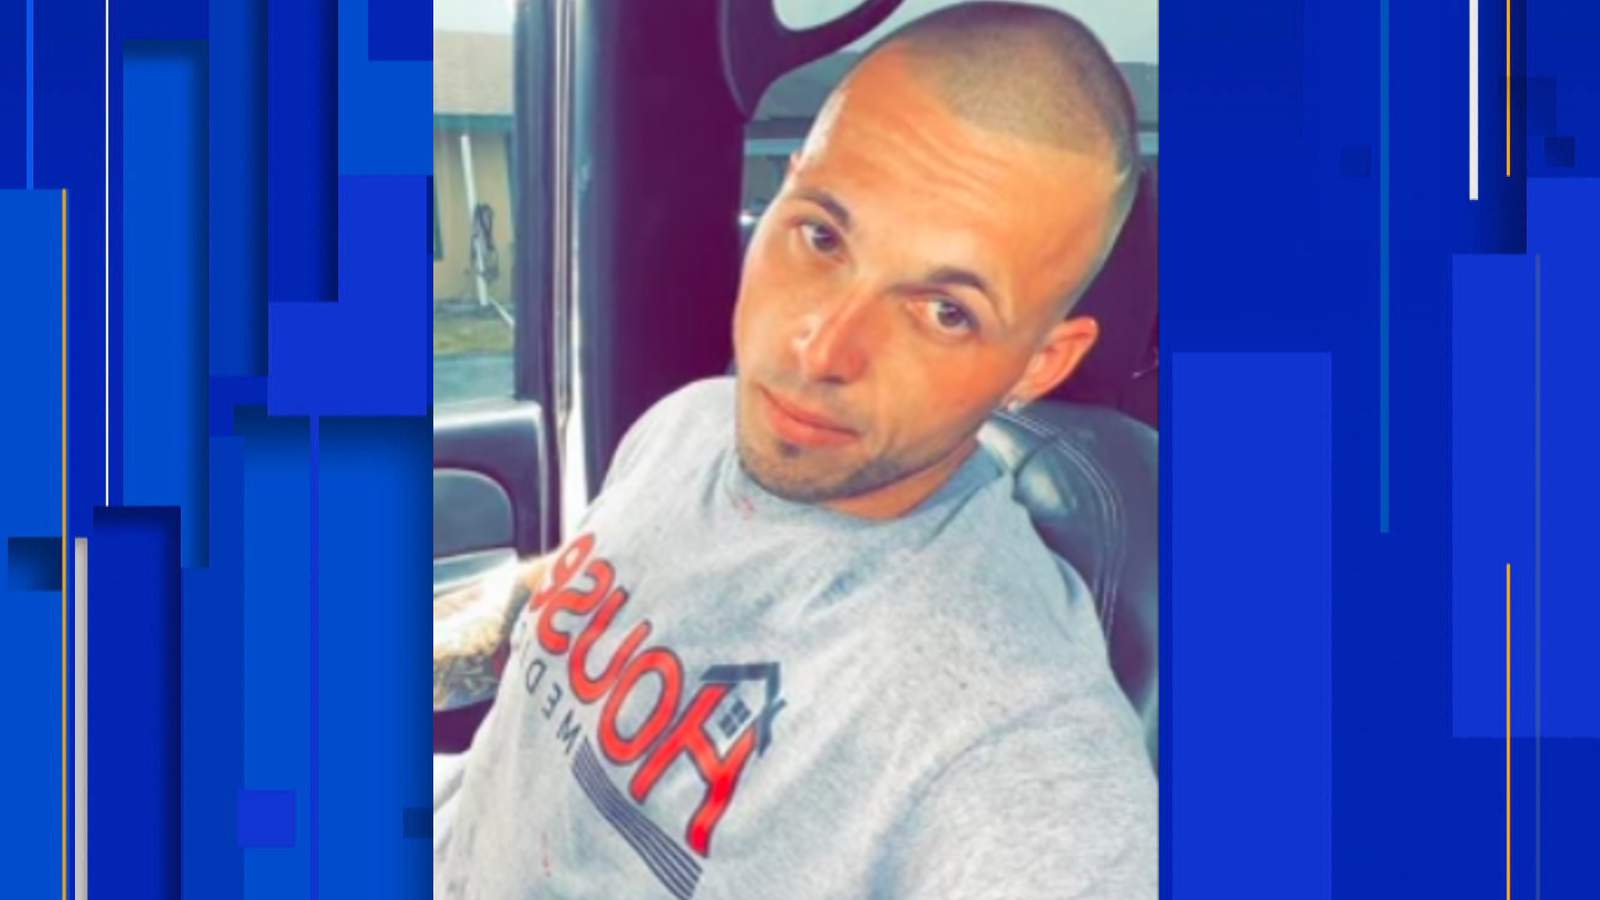 Deputies search for missing Ocala man